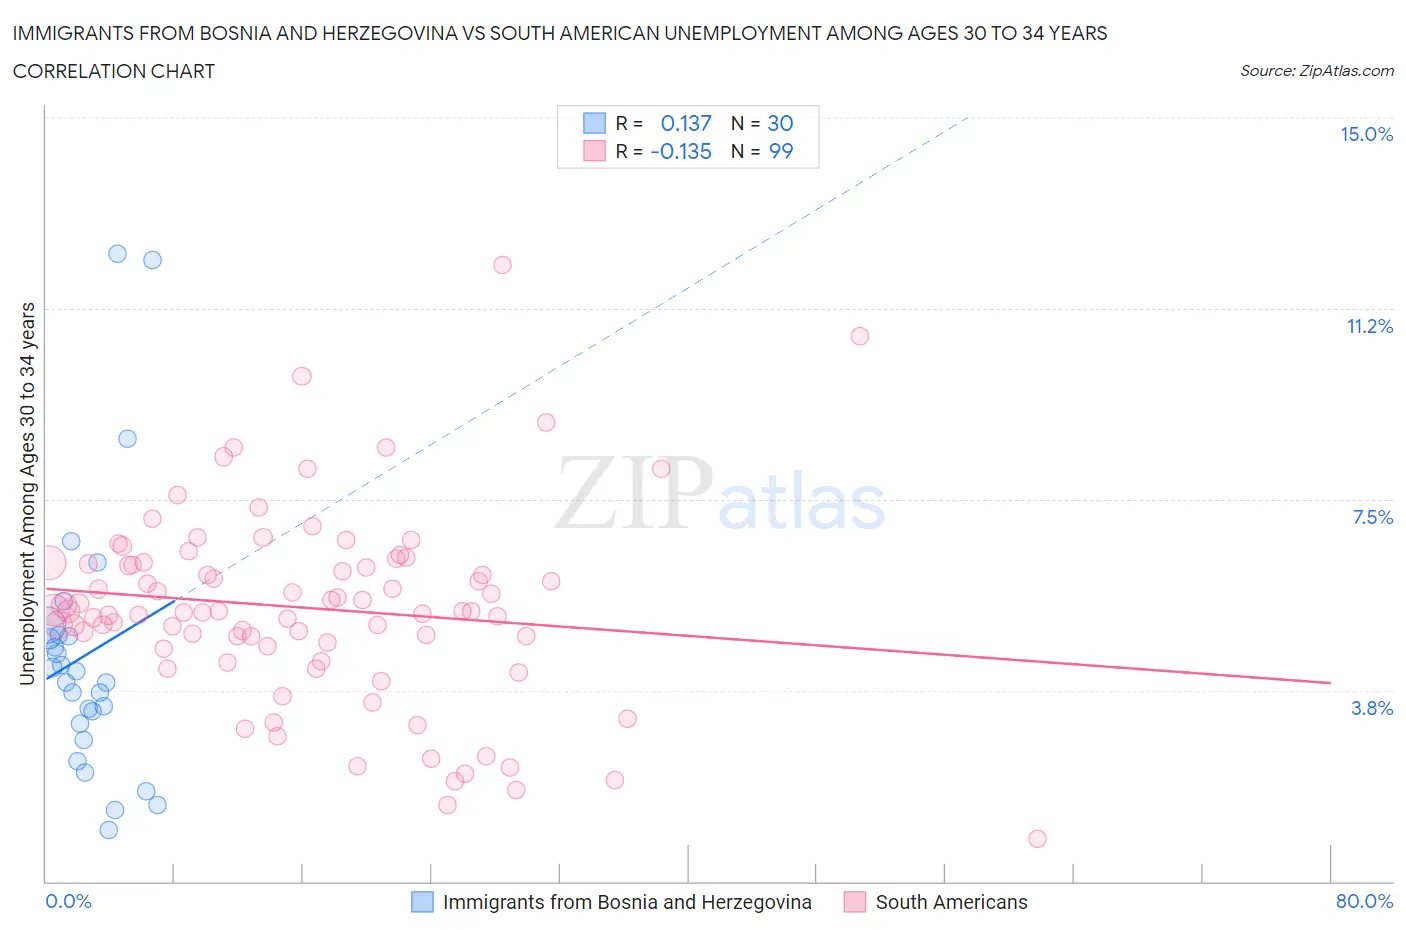 Immigrants from Bosnia and Herzegovina vs South American Unemployment Among Ages 30 to 34 years